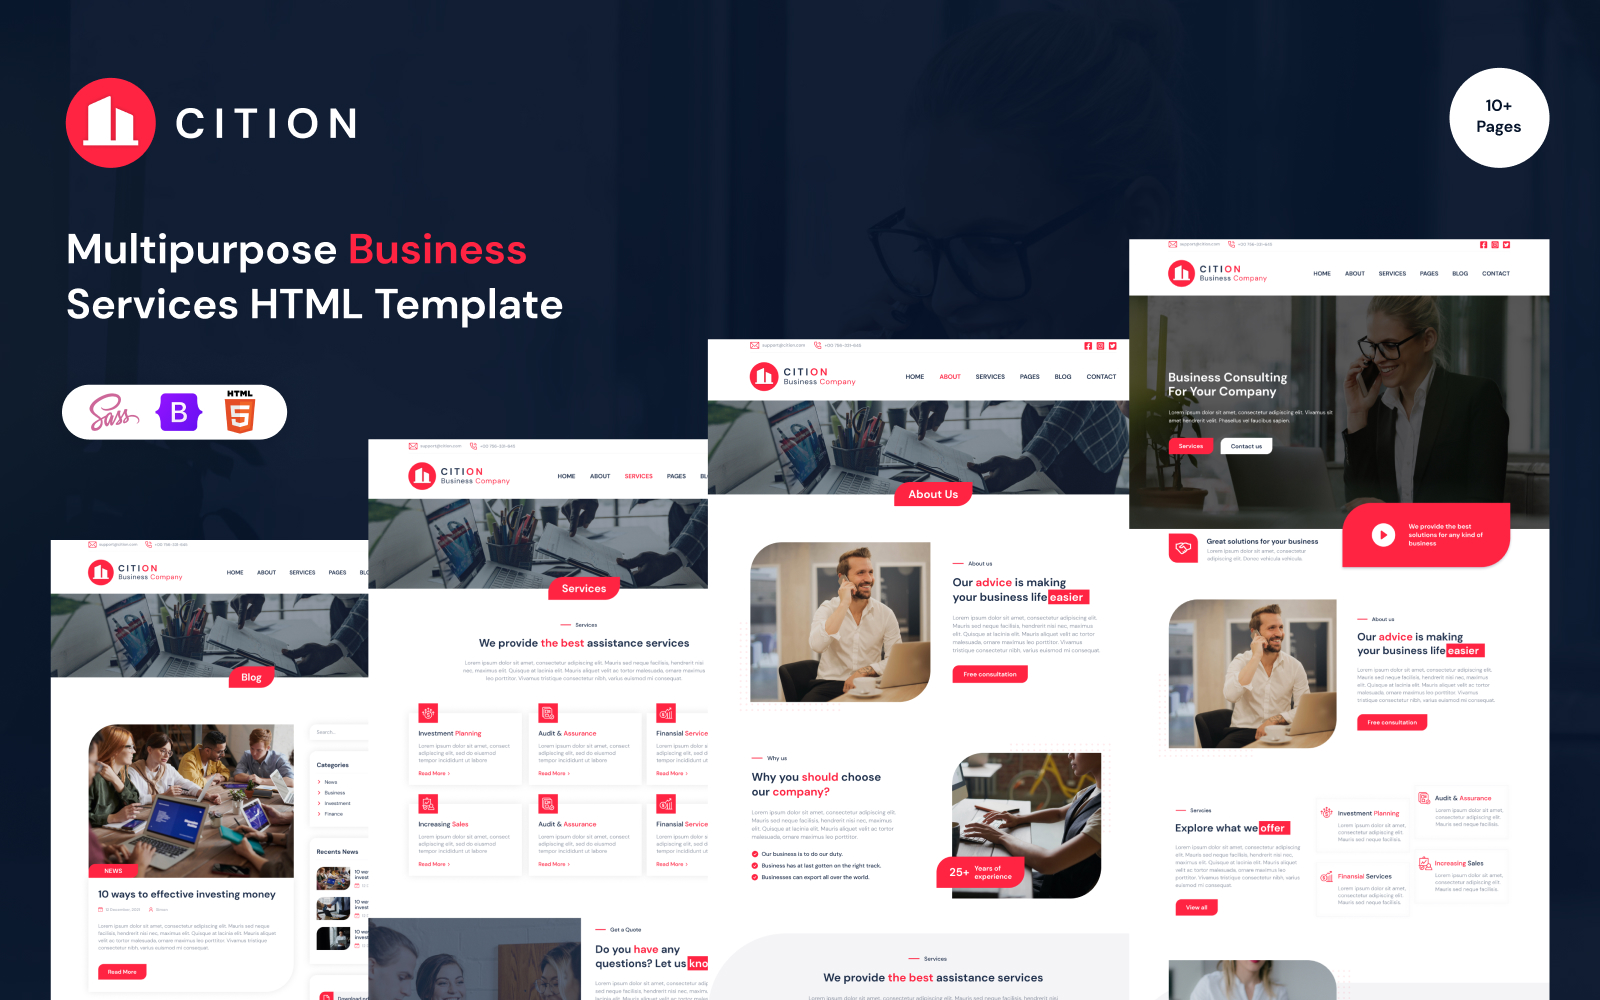 CITION - Multipurpose Business Services Template